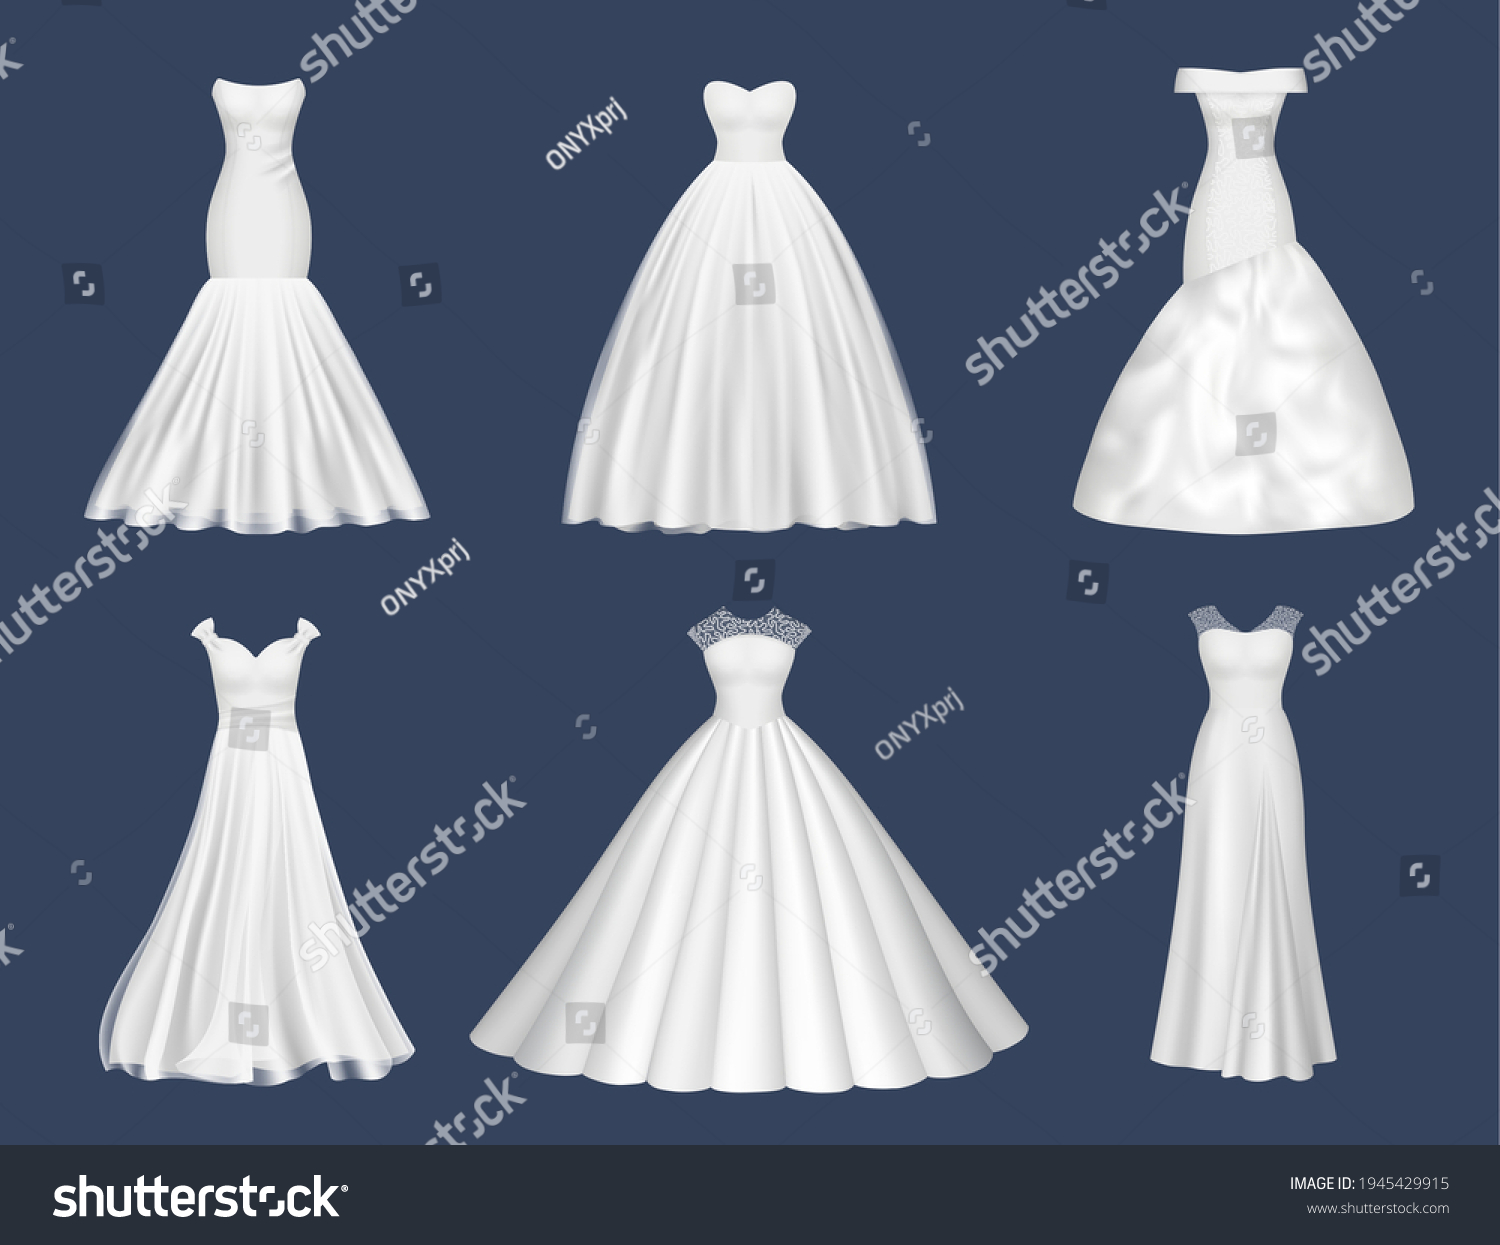 SVG of White dresses. Wedding clothes for beauty woman fashion dresses for brides evening party decent vector realistic pictures svg